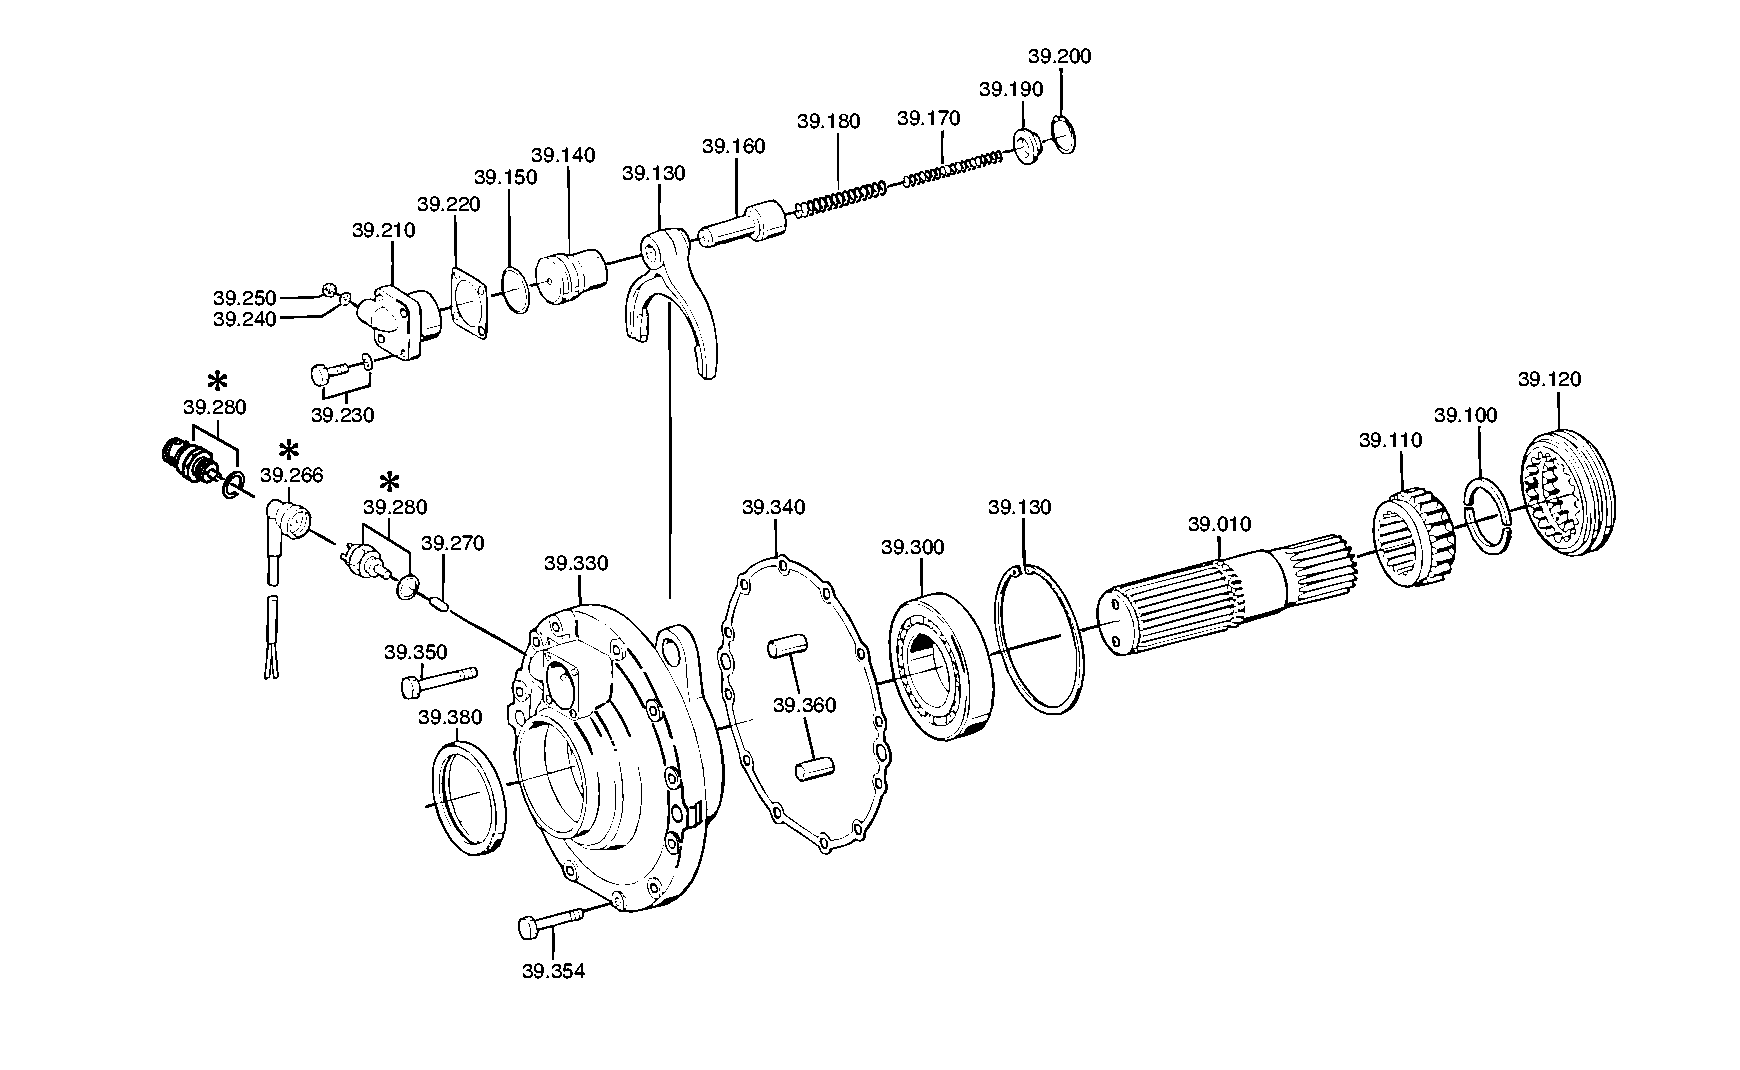 drawing for DAF 694034 - PRESSURE SWITCH (figure 1)